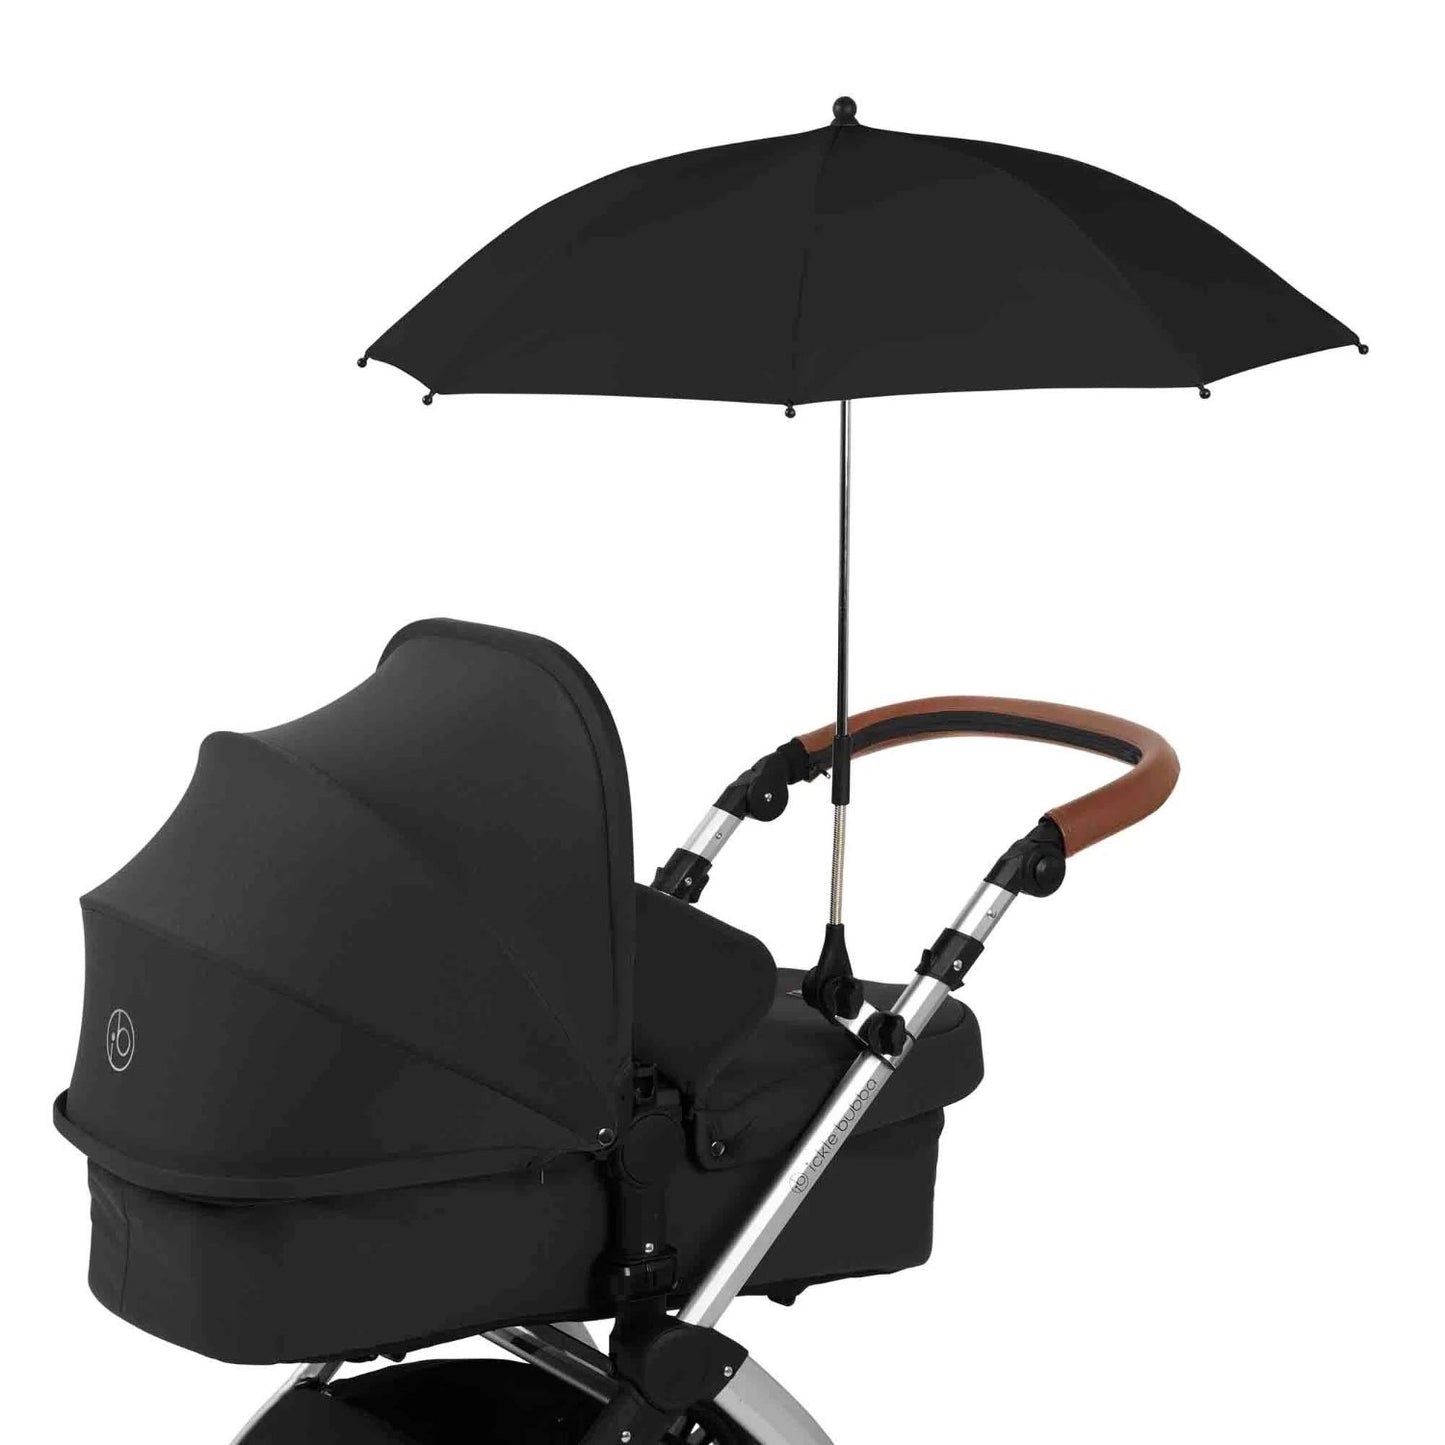 Ickle Bubba Parasol Universal Travel Accessory in Black colour attached to a black Ickle Bubba stroller